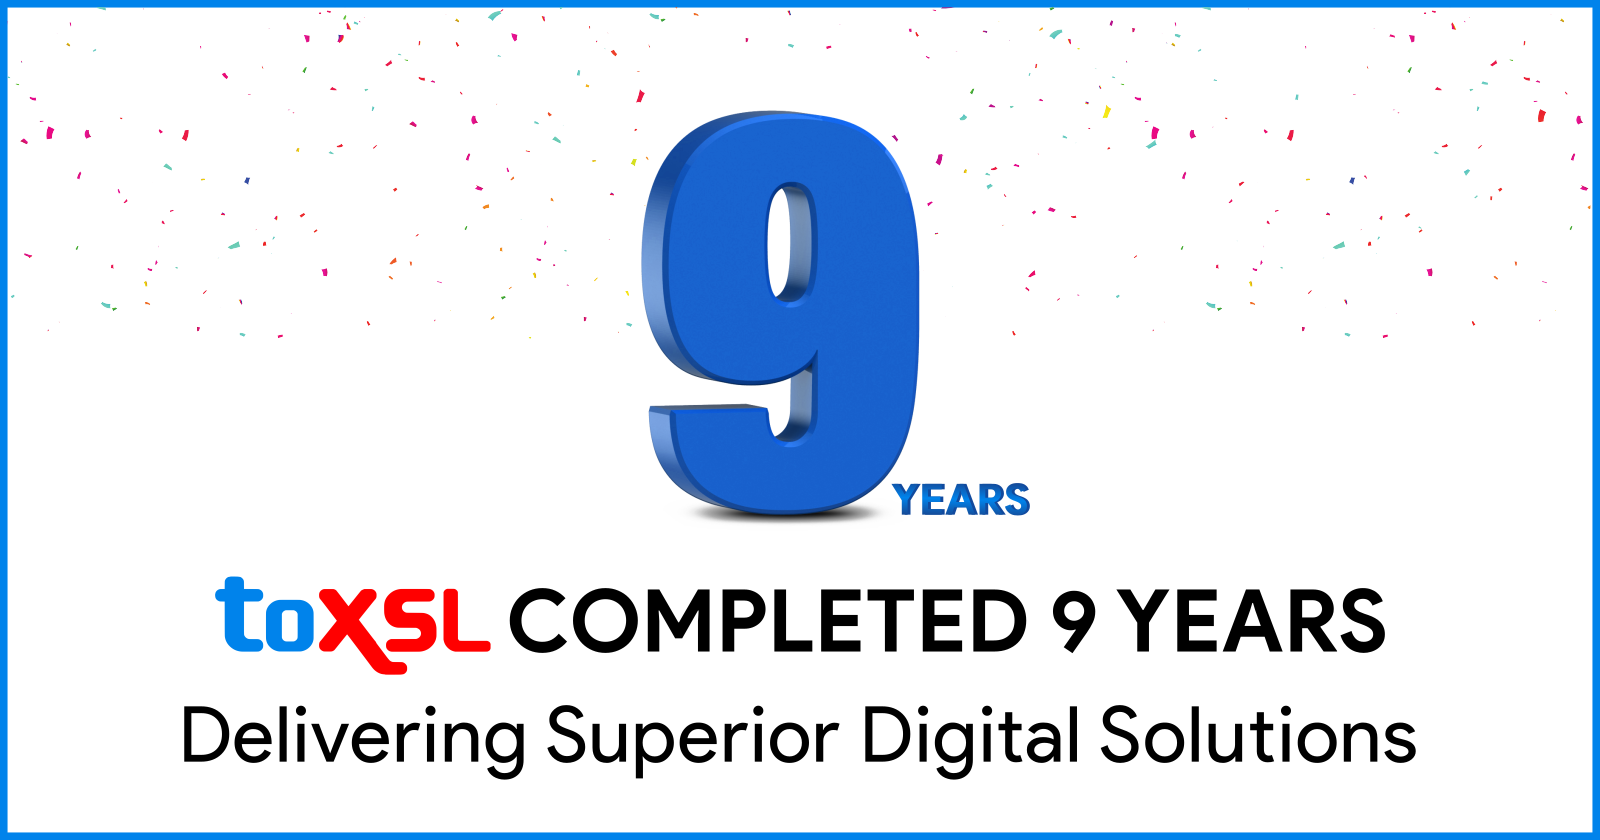 ToXSL Completed 9 Years: Delivering Superior Digital Solutions!